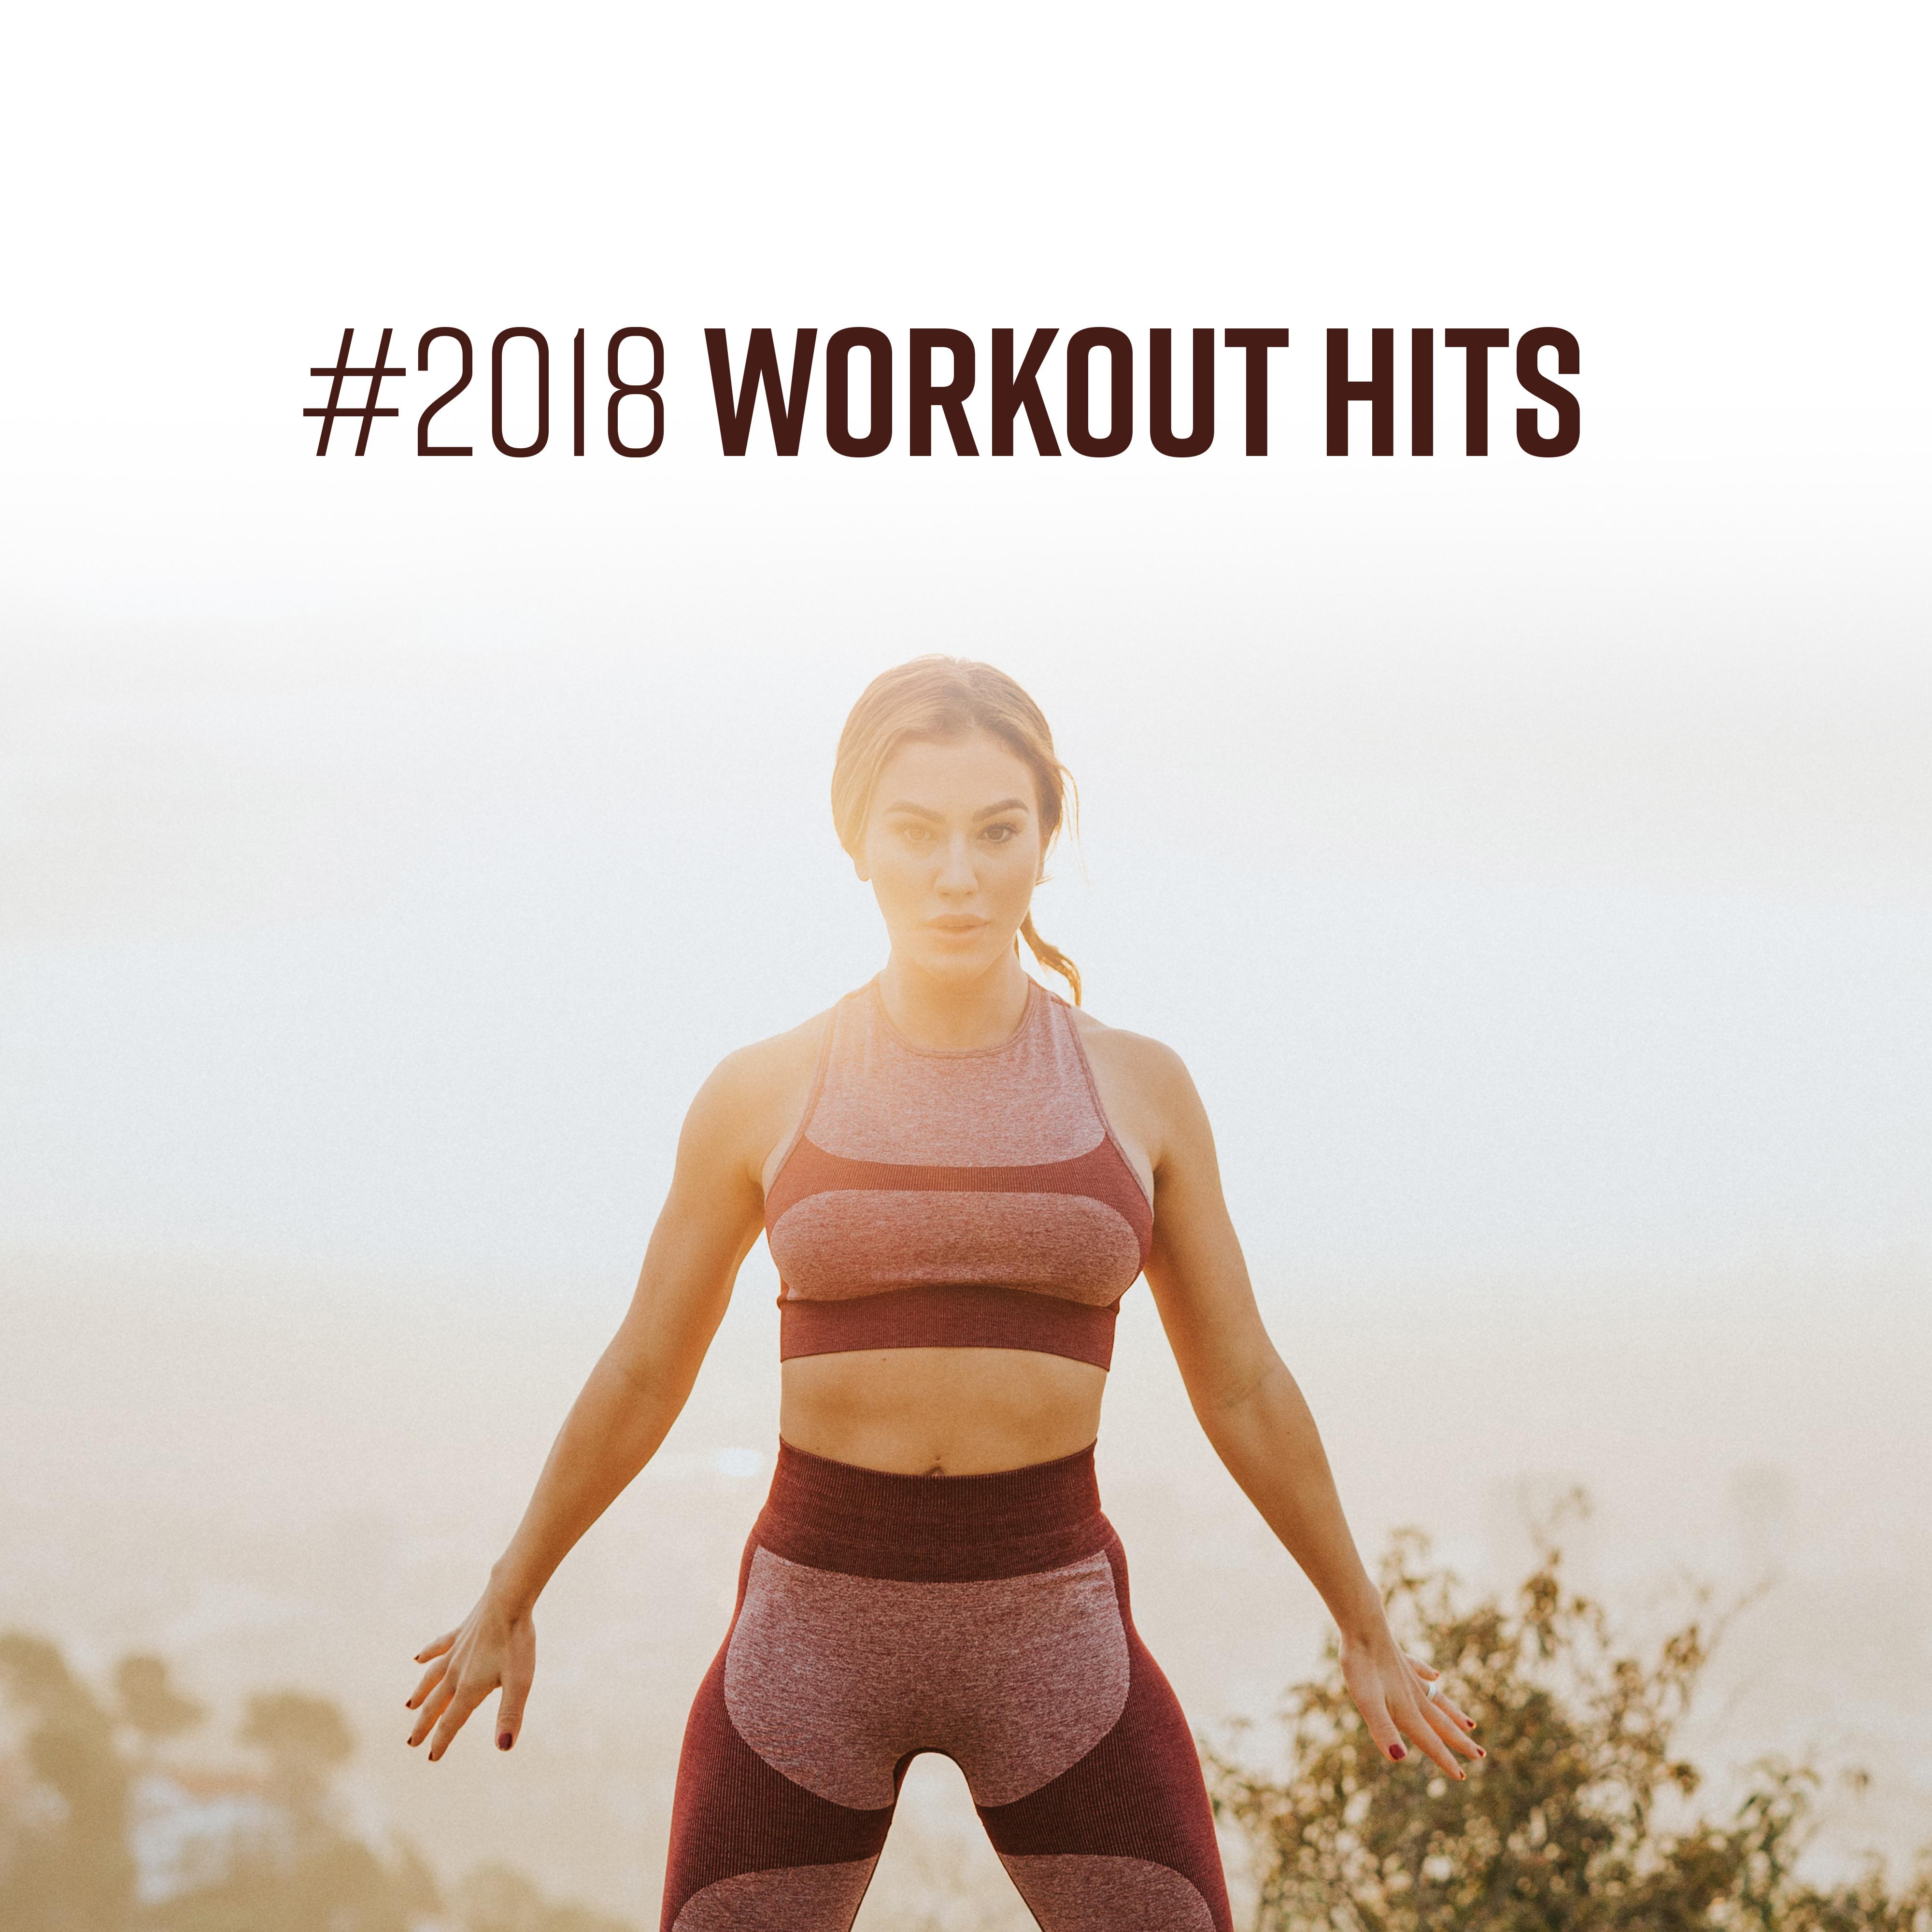 #2018 Workout Hits – Motivational Music for Fitness & Gym